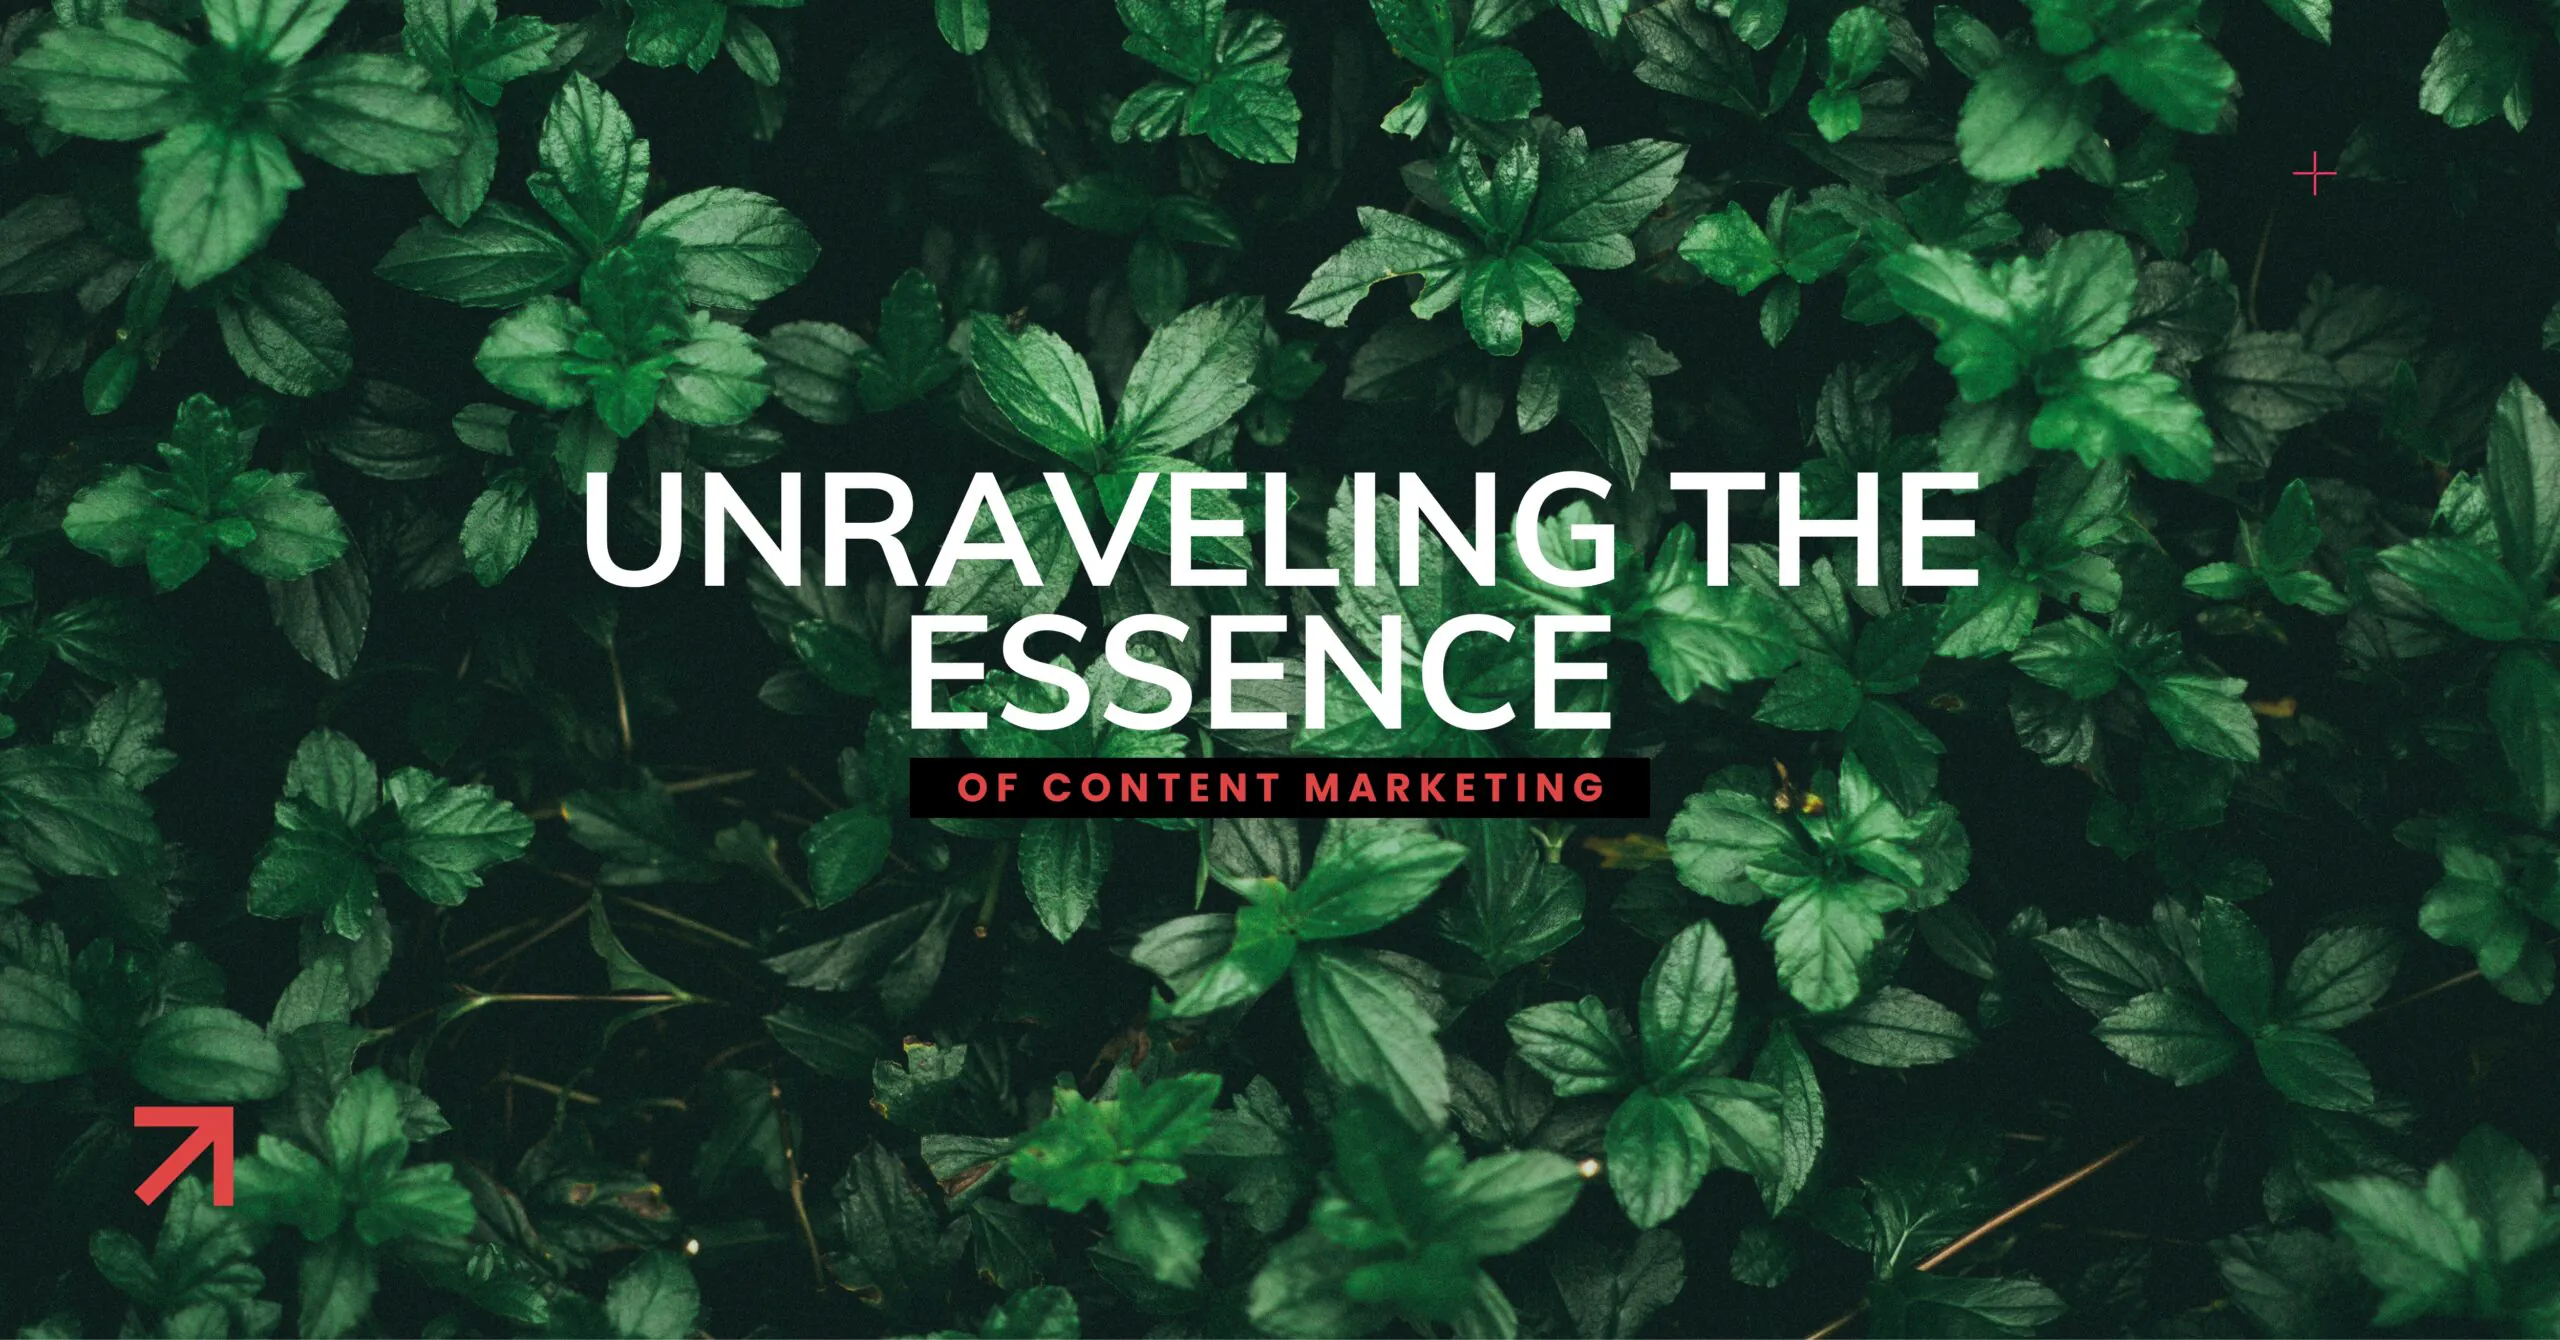 Unraveling the Essence of Content Marketing